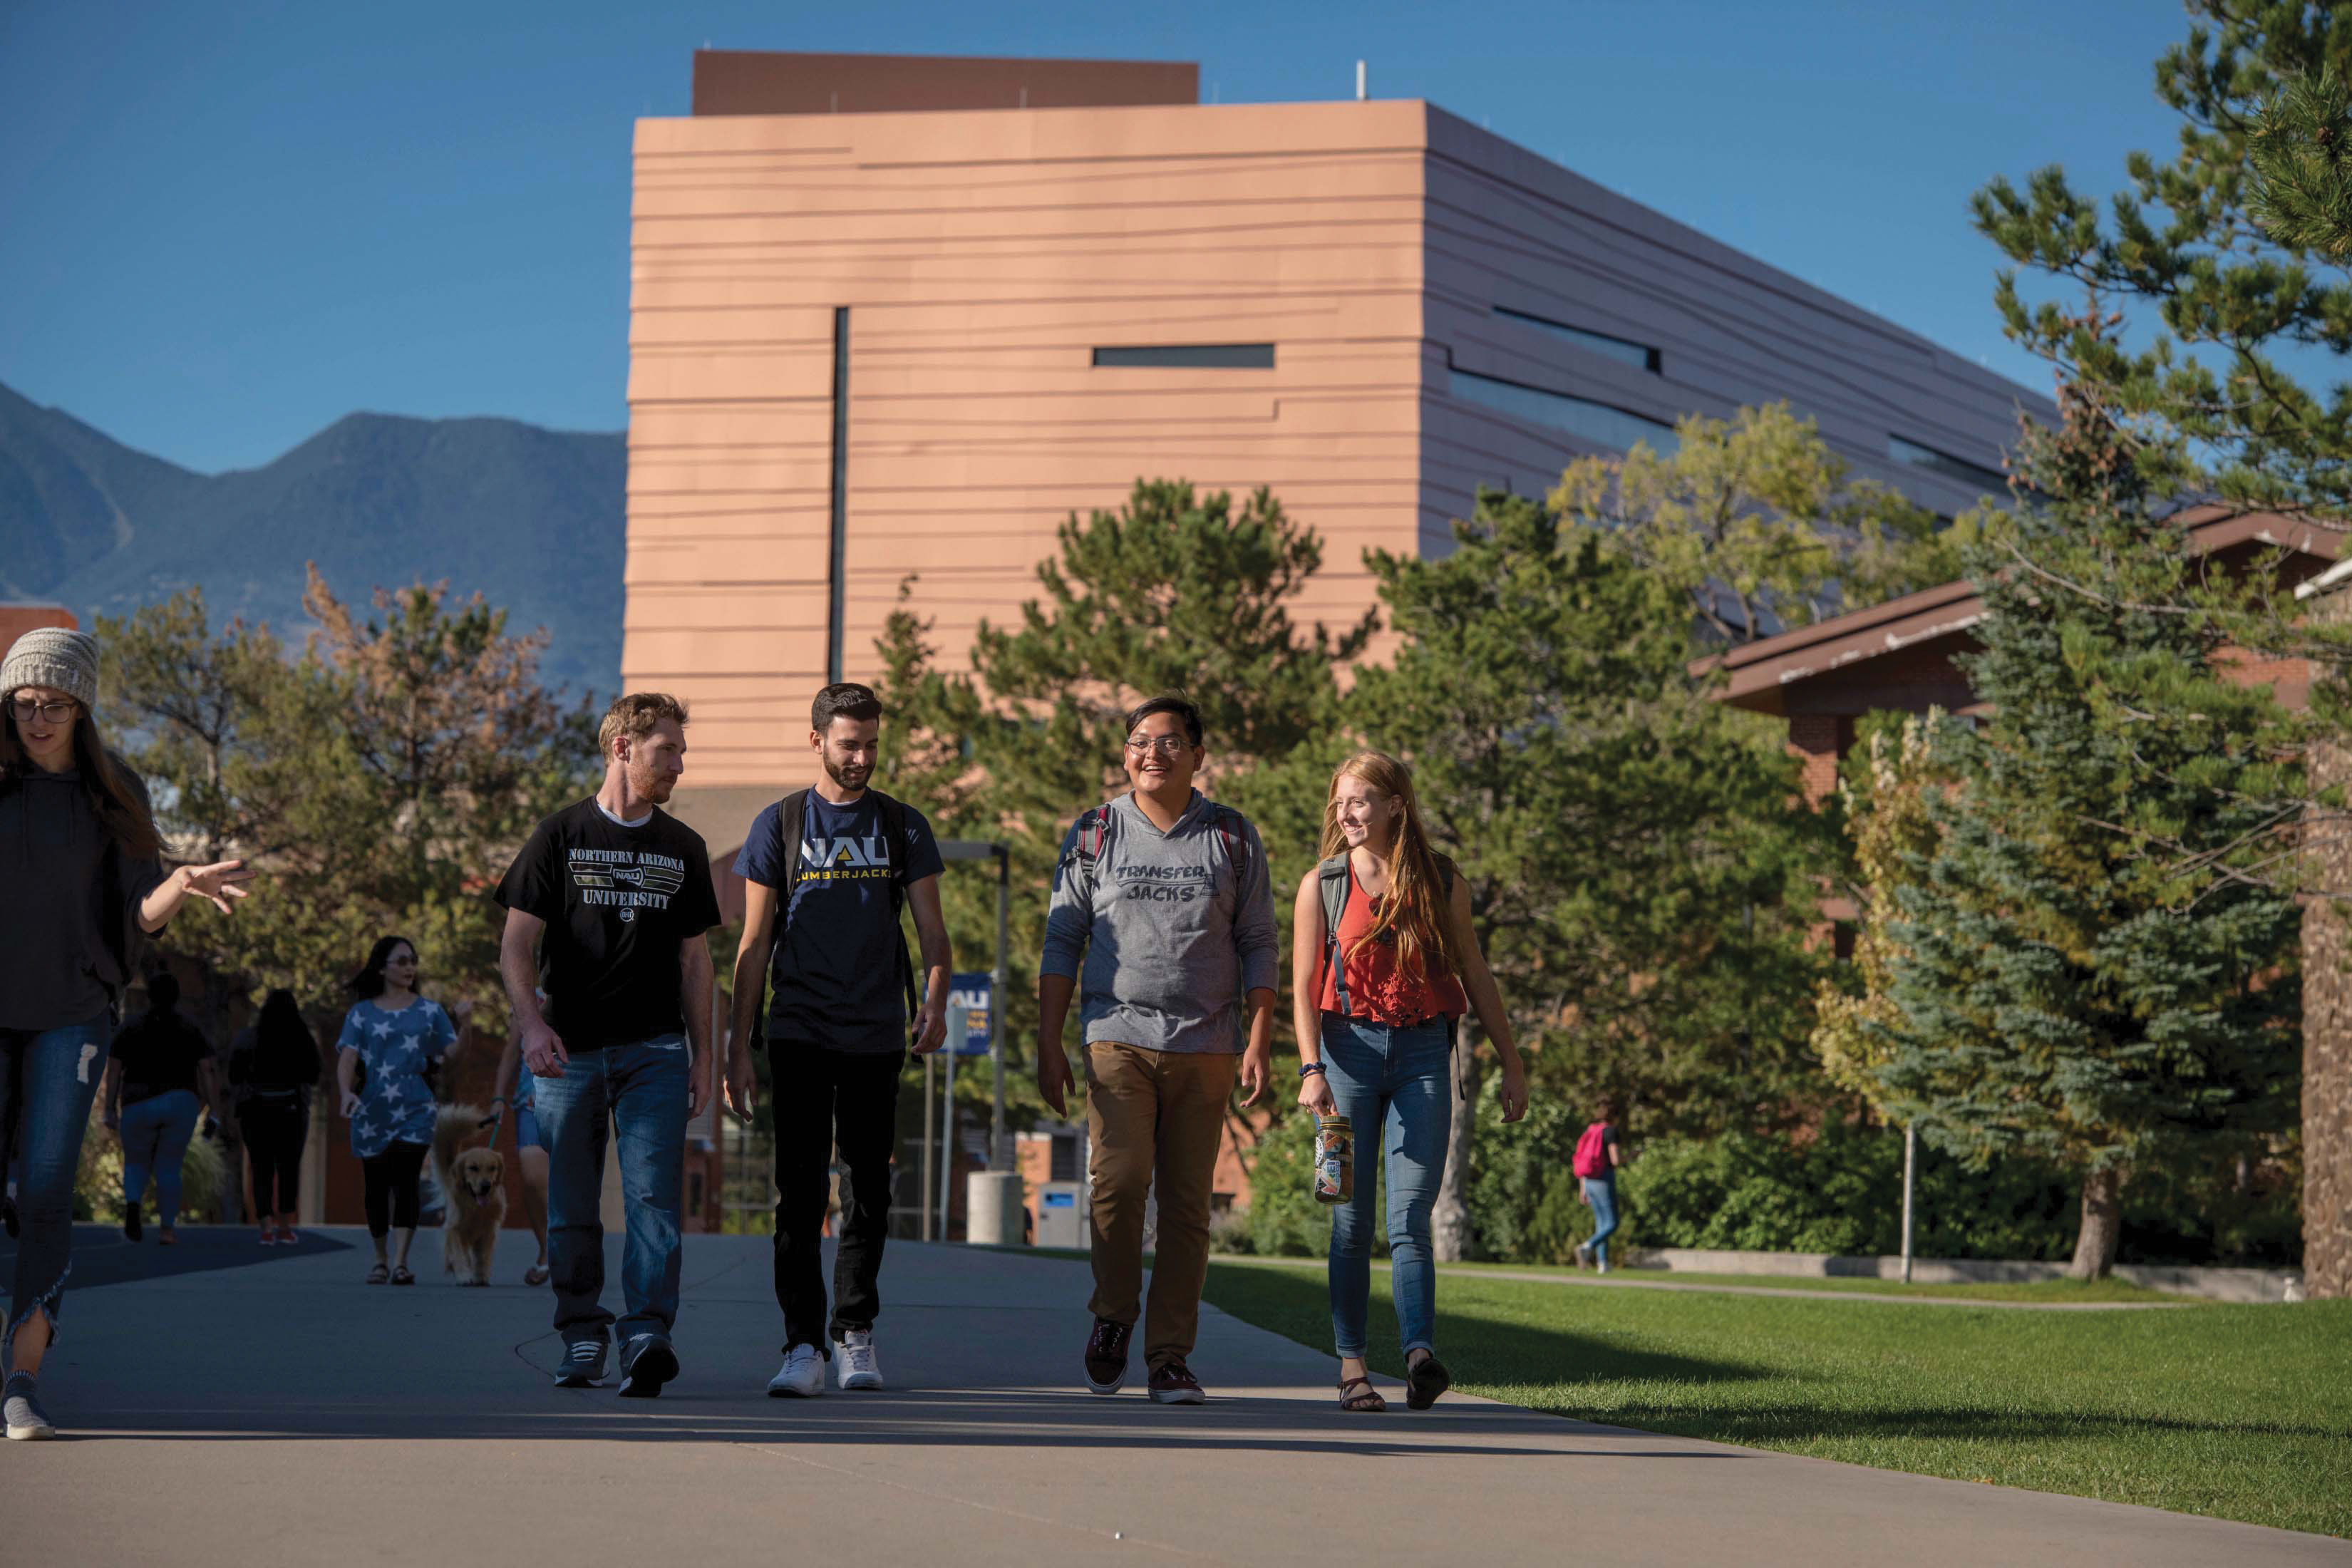 Four students smiling while walking together outside.